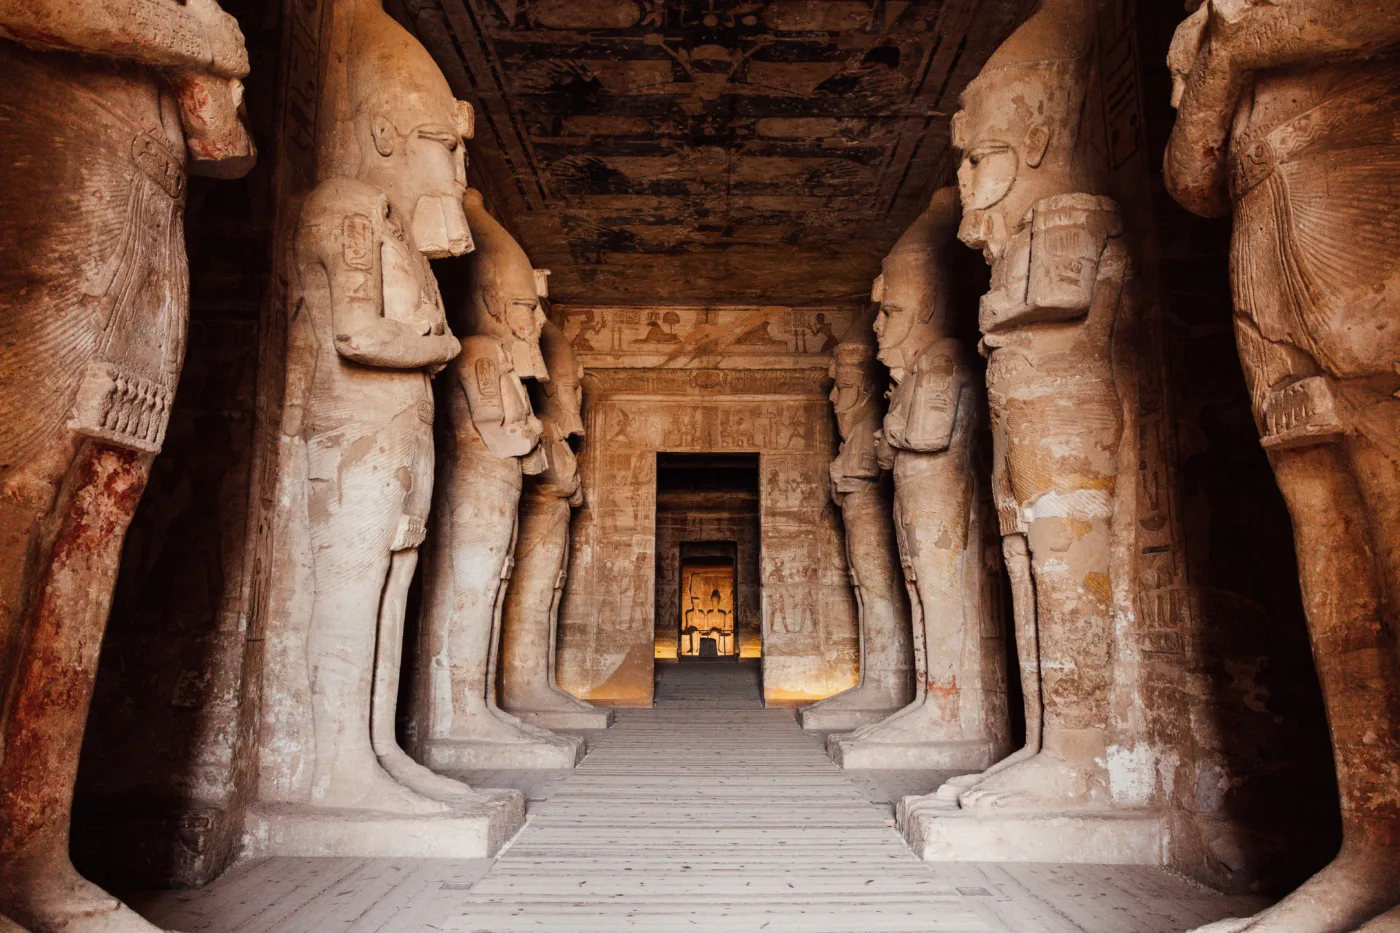 Interior of the The Great Temple at Abu Simbel in Upper Egypt